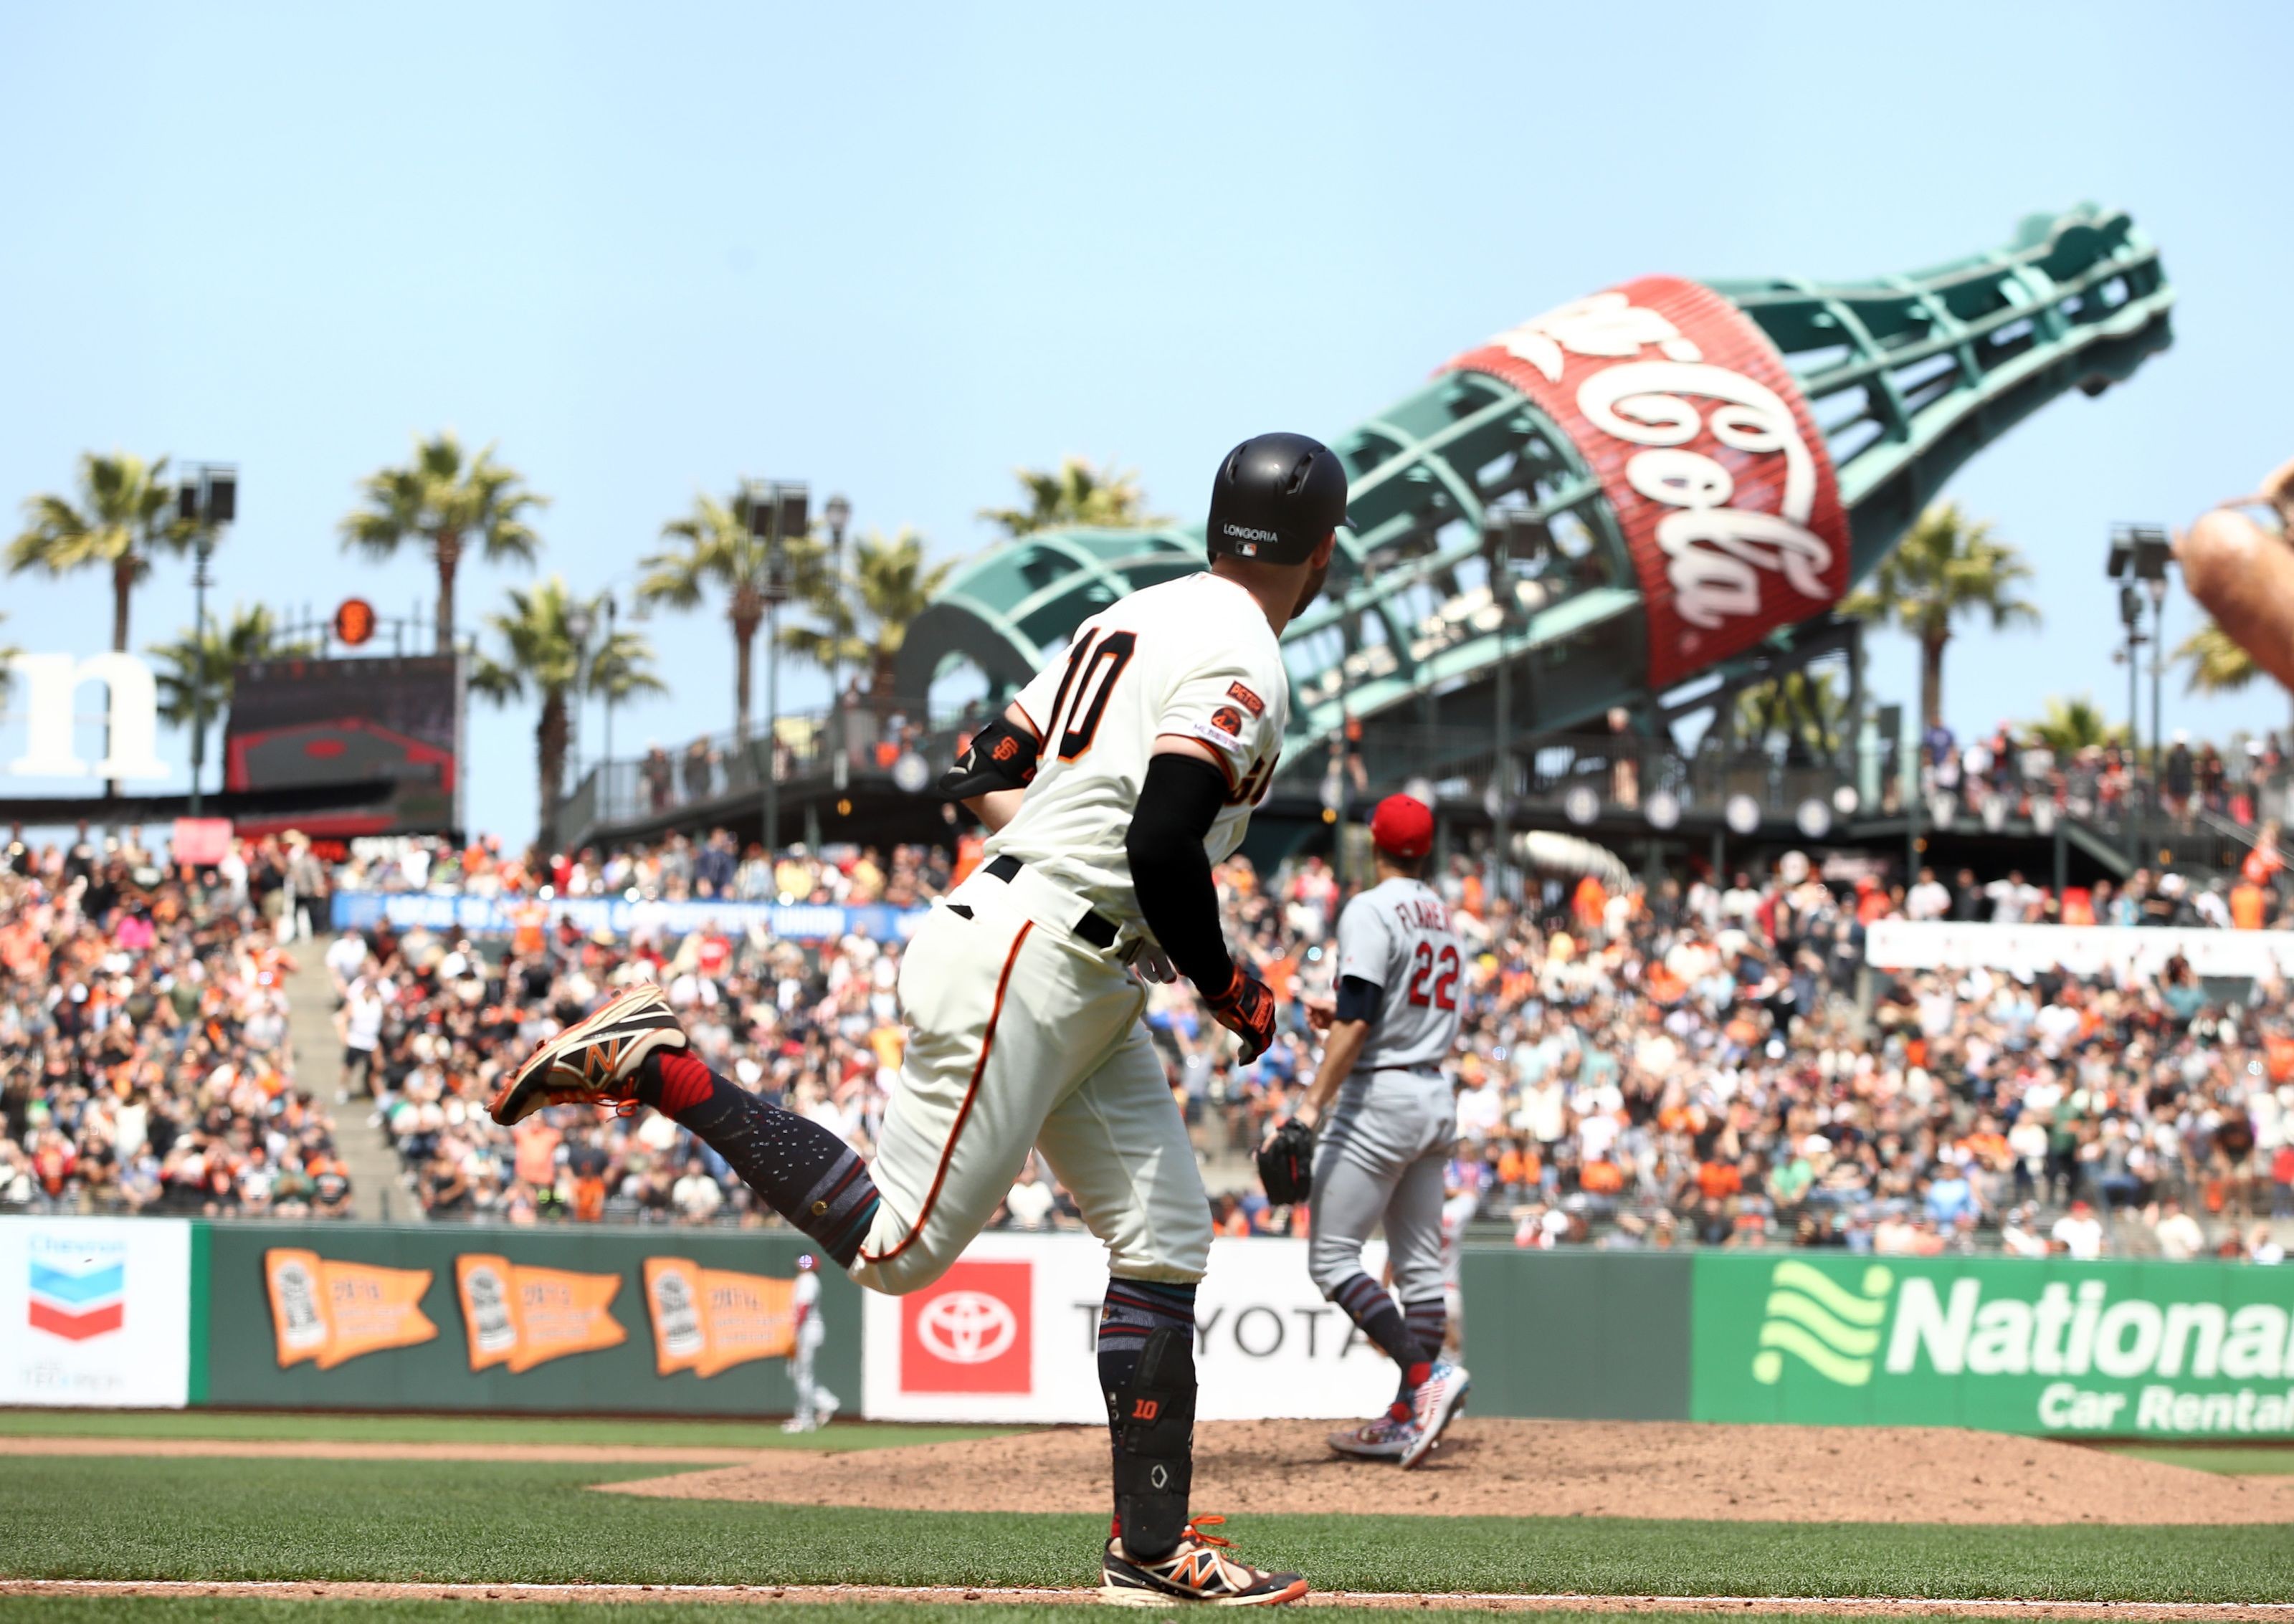 San Francisco Giants 5 bold predictions for the second half of the season